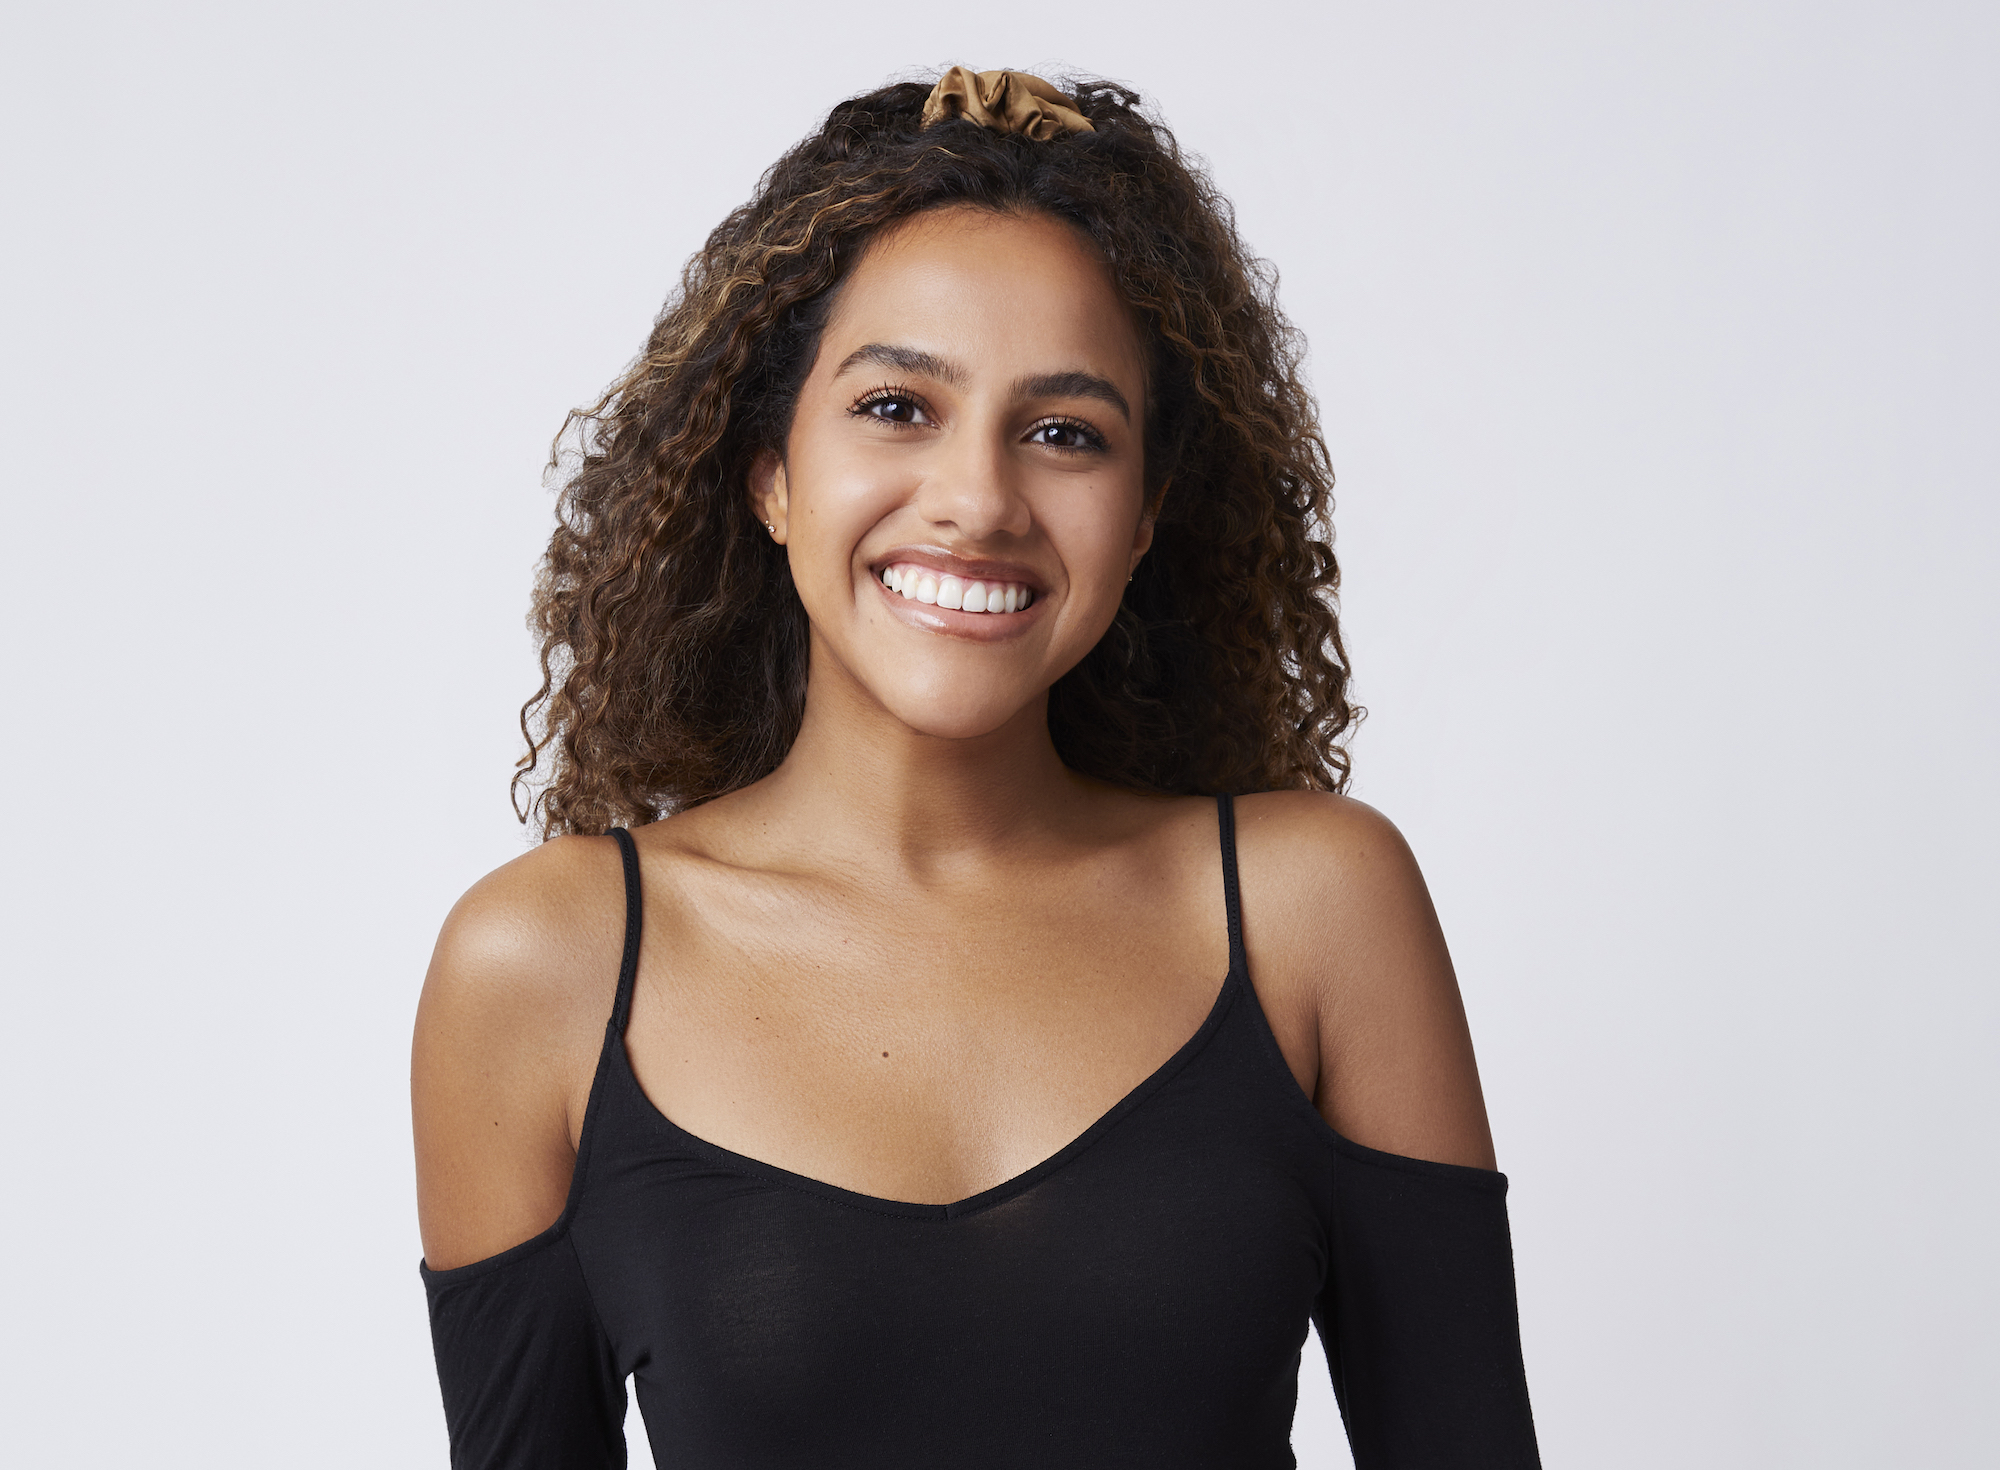 'The Bachelor' 2022 contestant Teddi Wright seen here in a promotional image wearing a black cold shoulder top